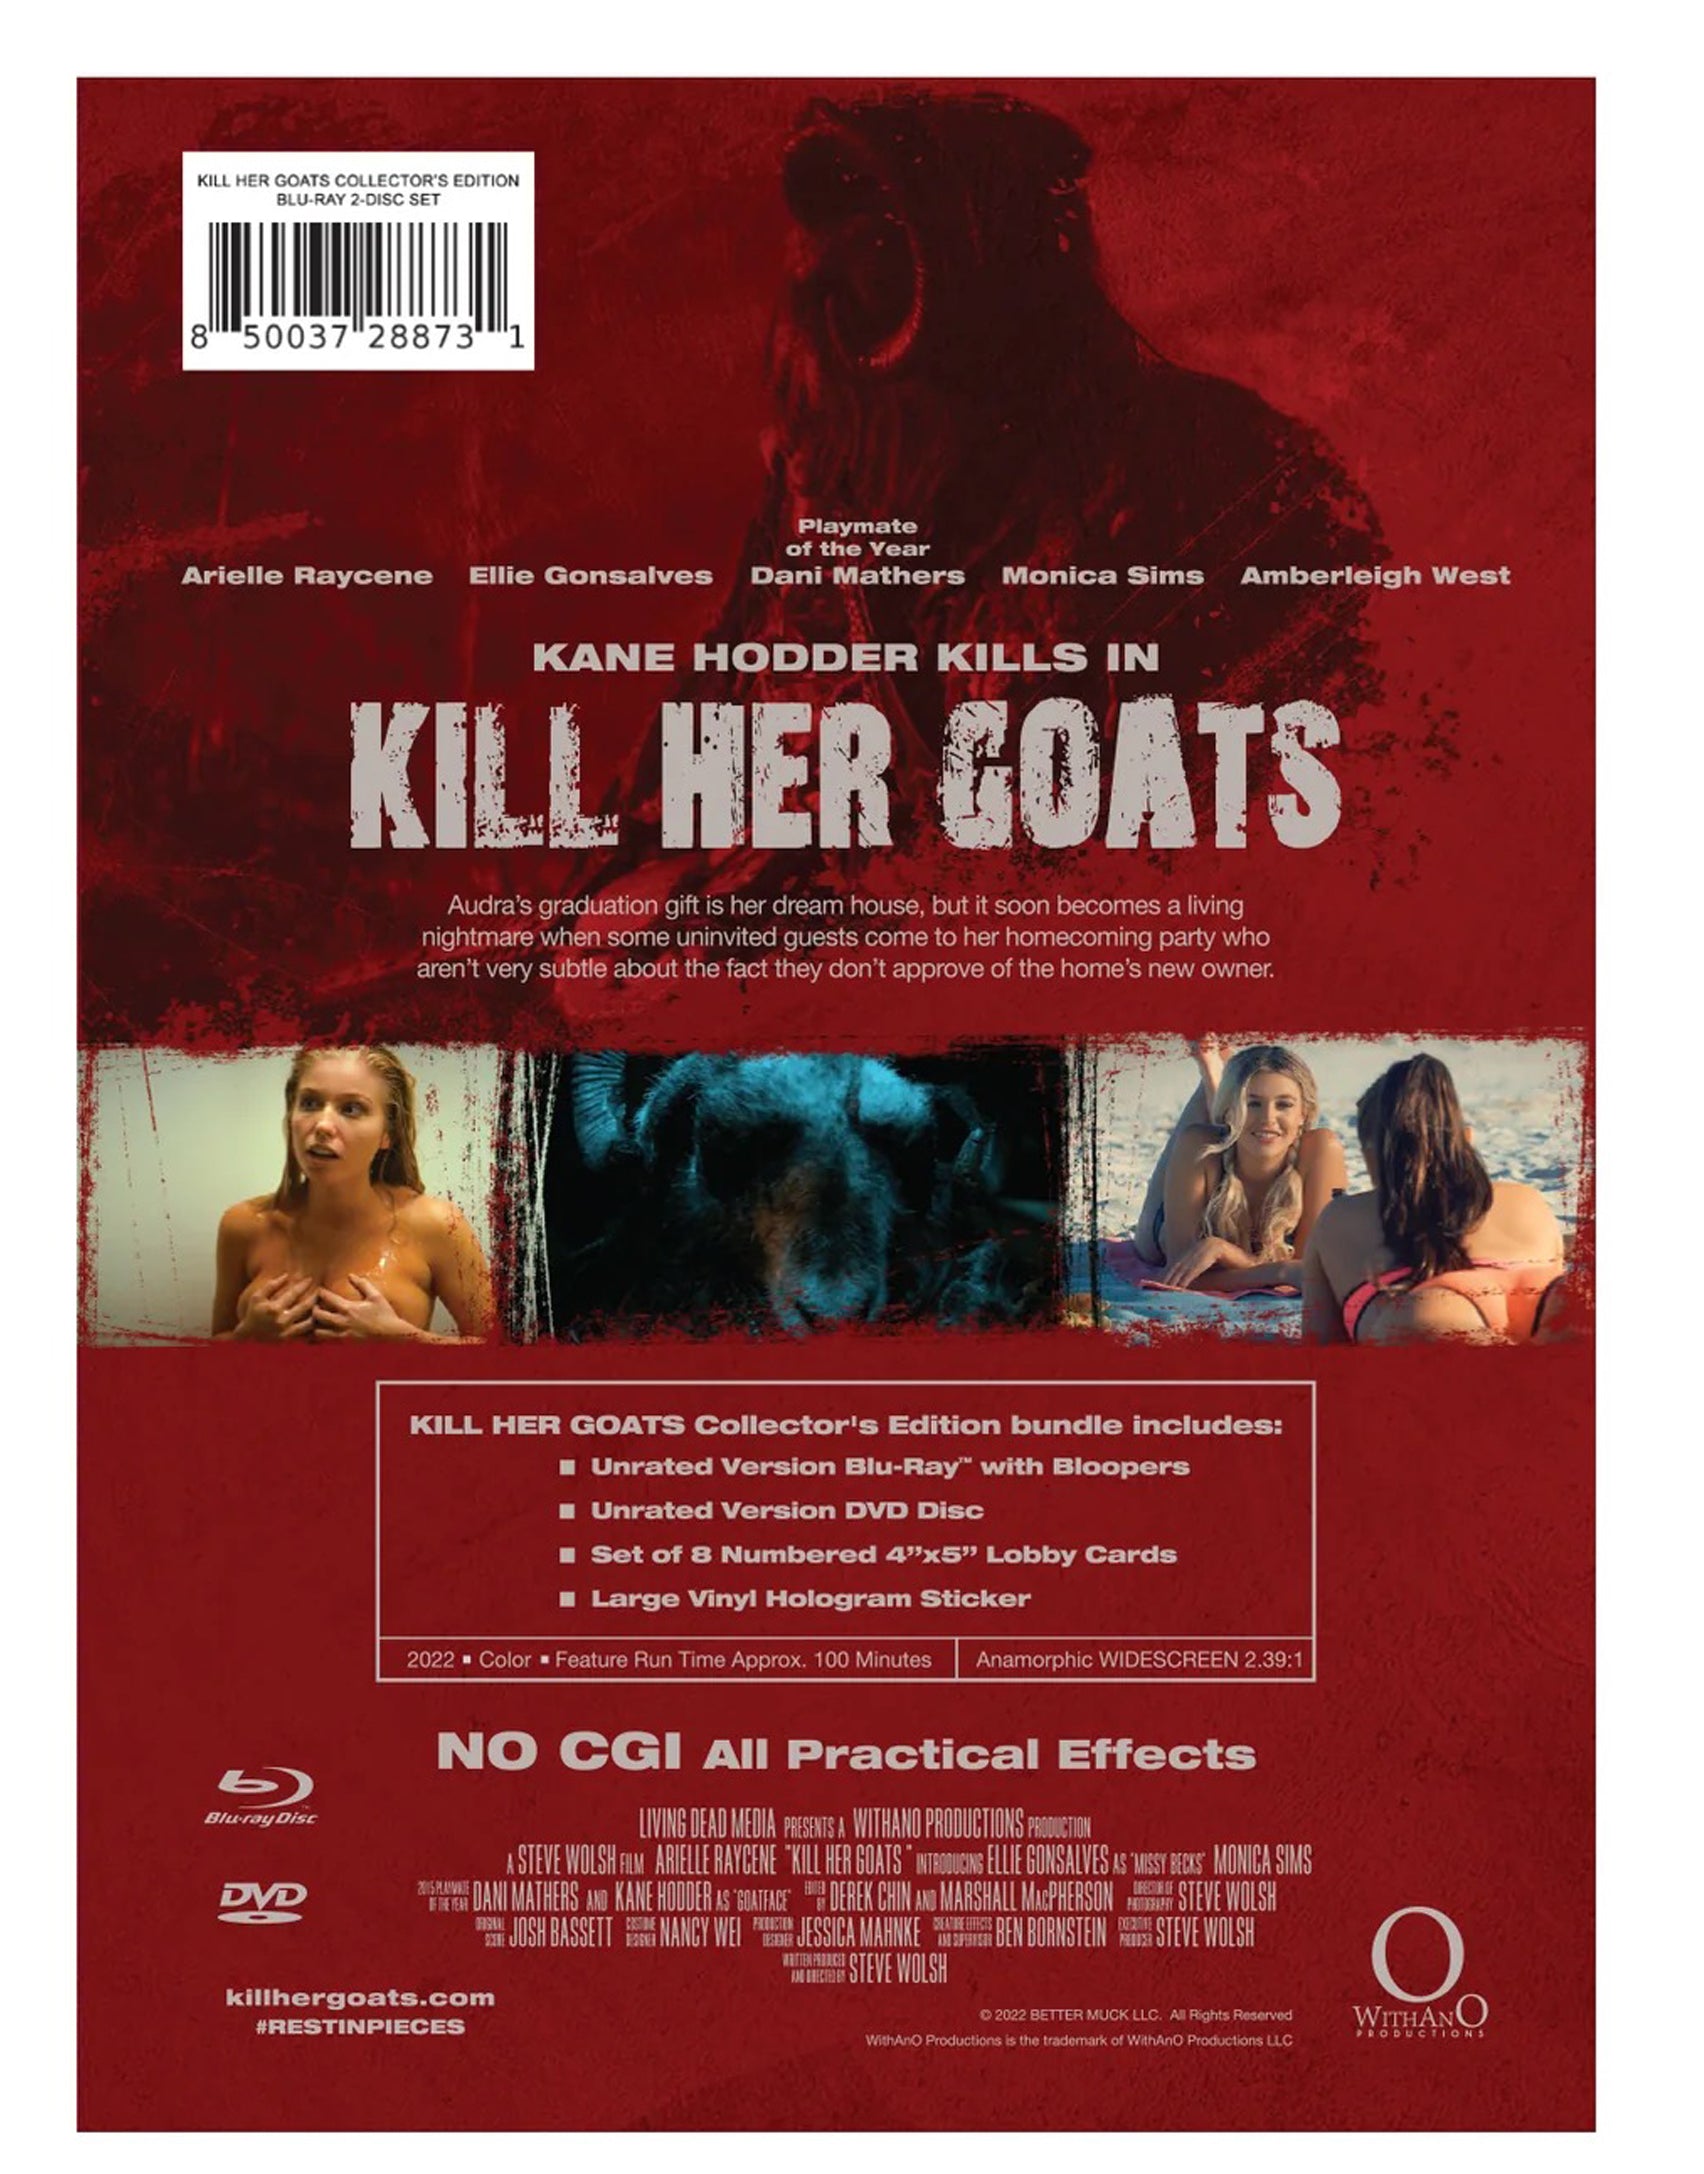 KILL HER GOATS - WIDESCREEN COLLECTOR'S EDITION BLU-RAY + DVD + COLLECTIBLES